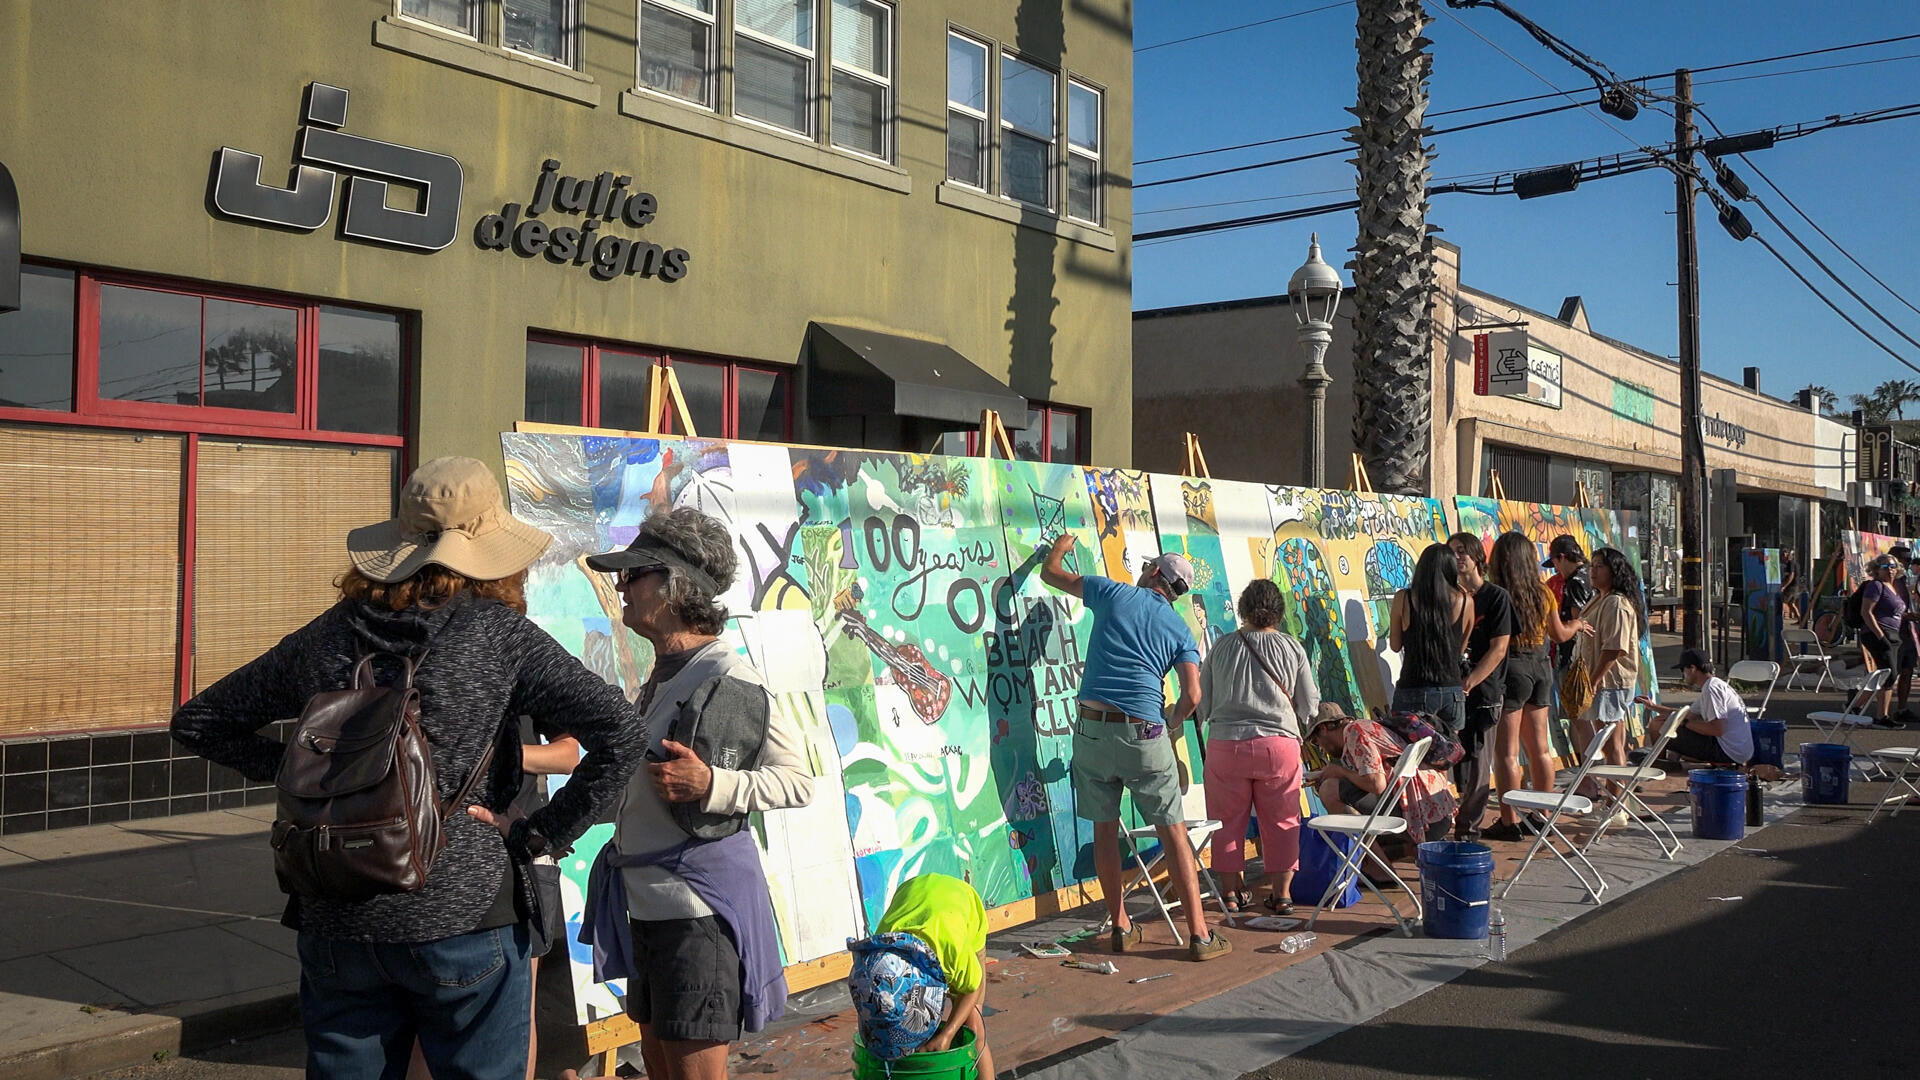 Photo of: 2024 Ocean Beach Street Fair and Chili Cook-Off - Murals and Artists Alley